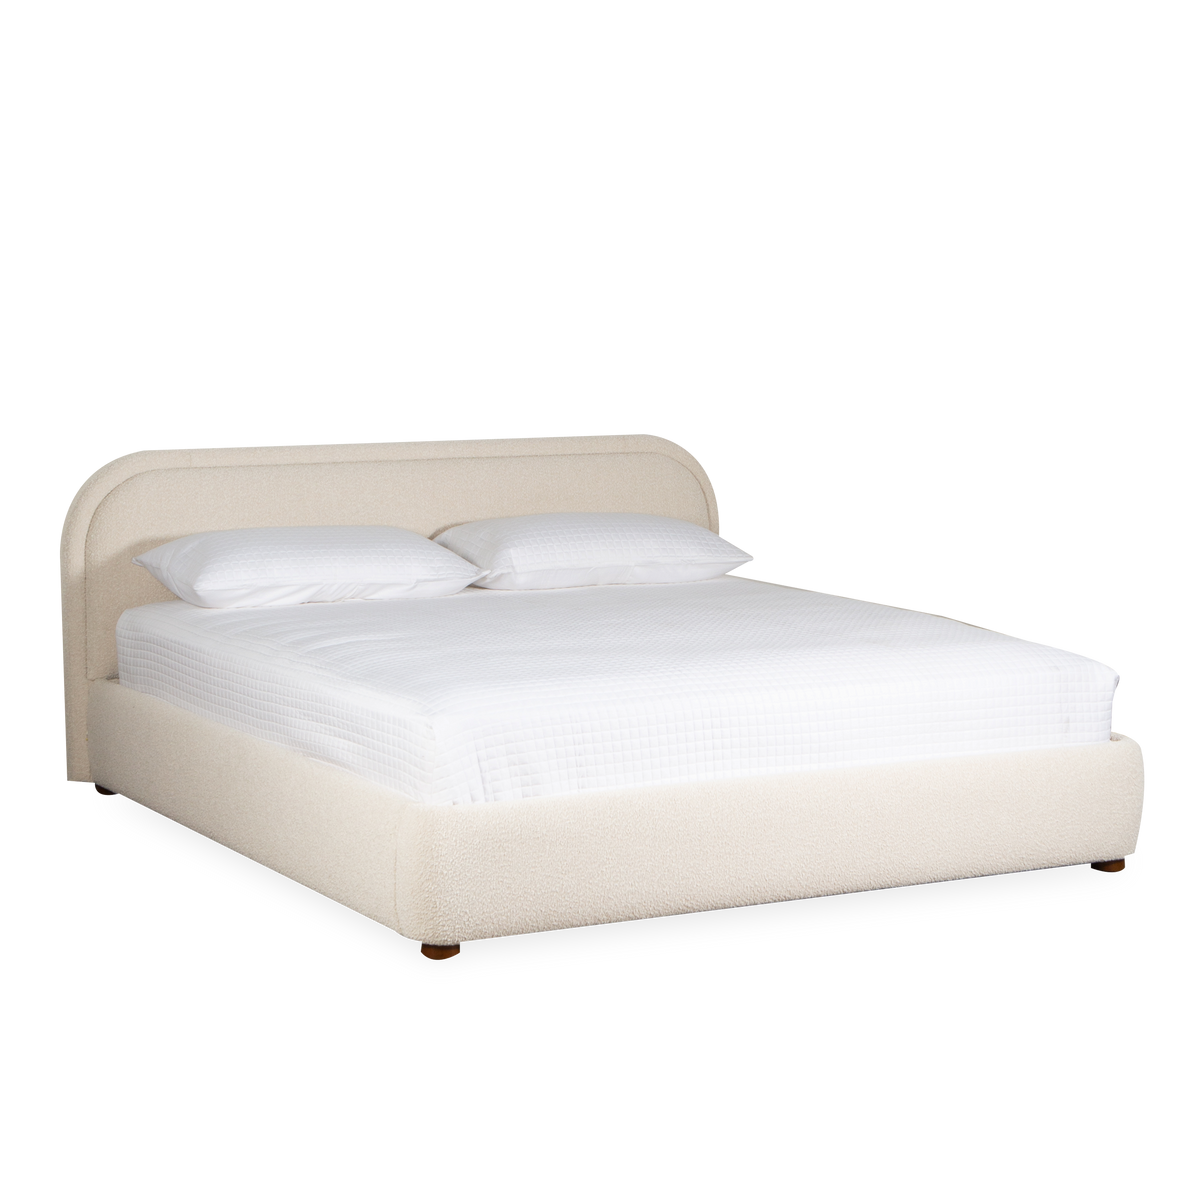 Embracing a gentle aesthetic, the Hollis Bed is a rich display of curving lines and soft edges.